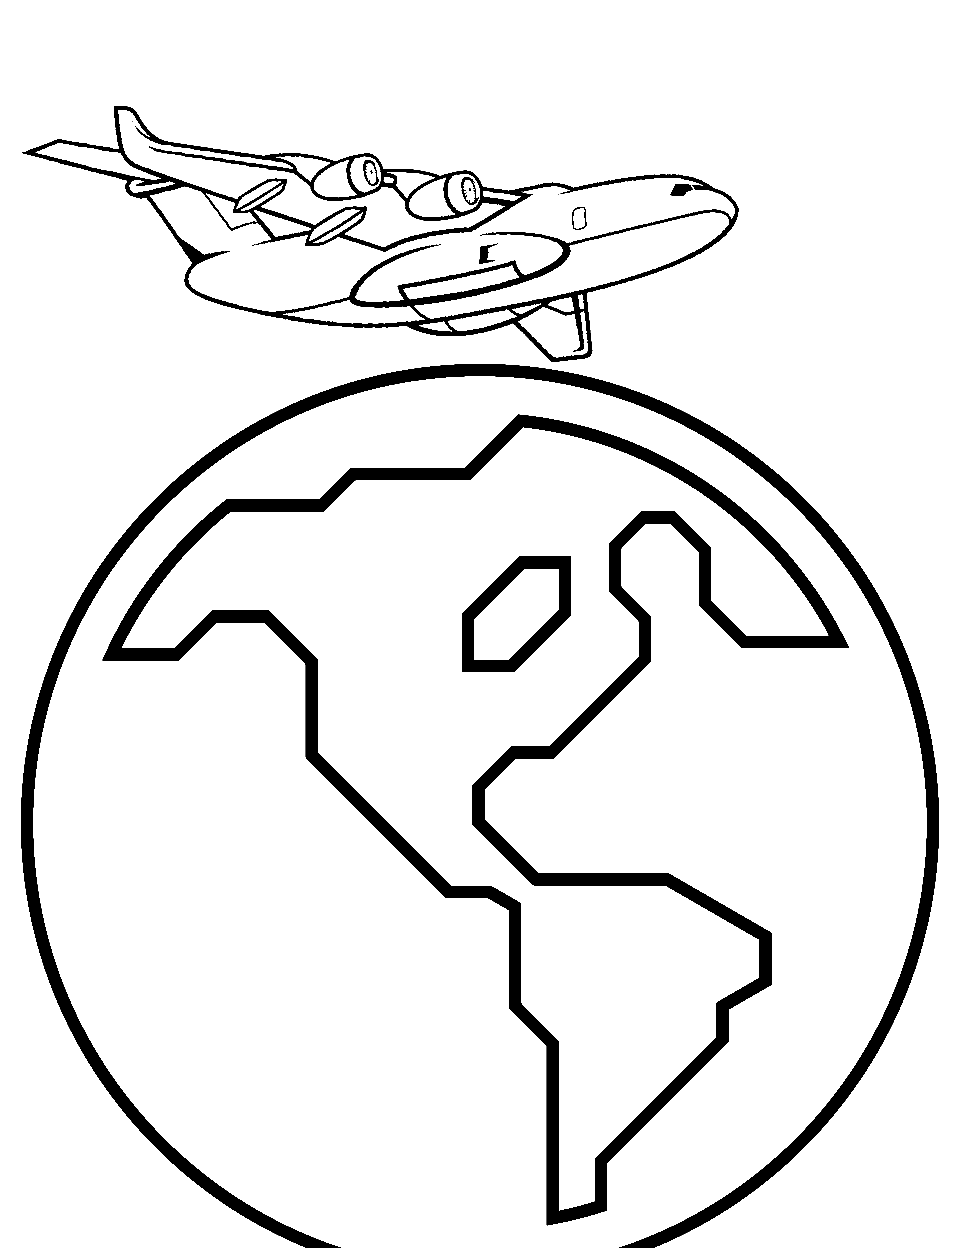 Air Cargo Transport Airplane Coloring Page - A large cargo plane carrying goods across continents.